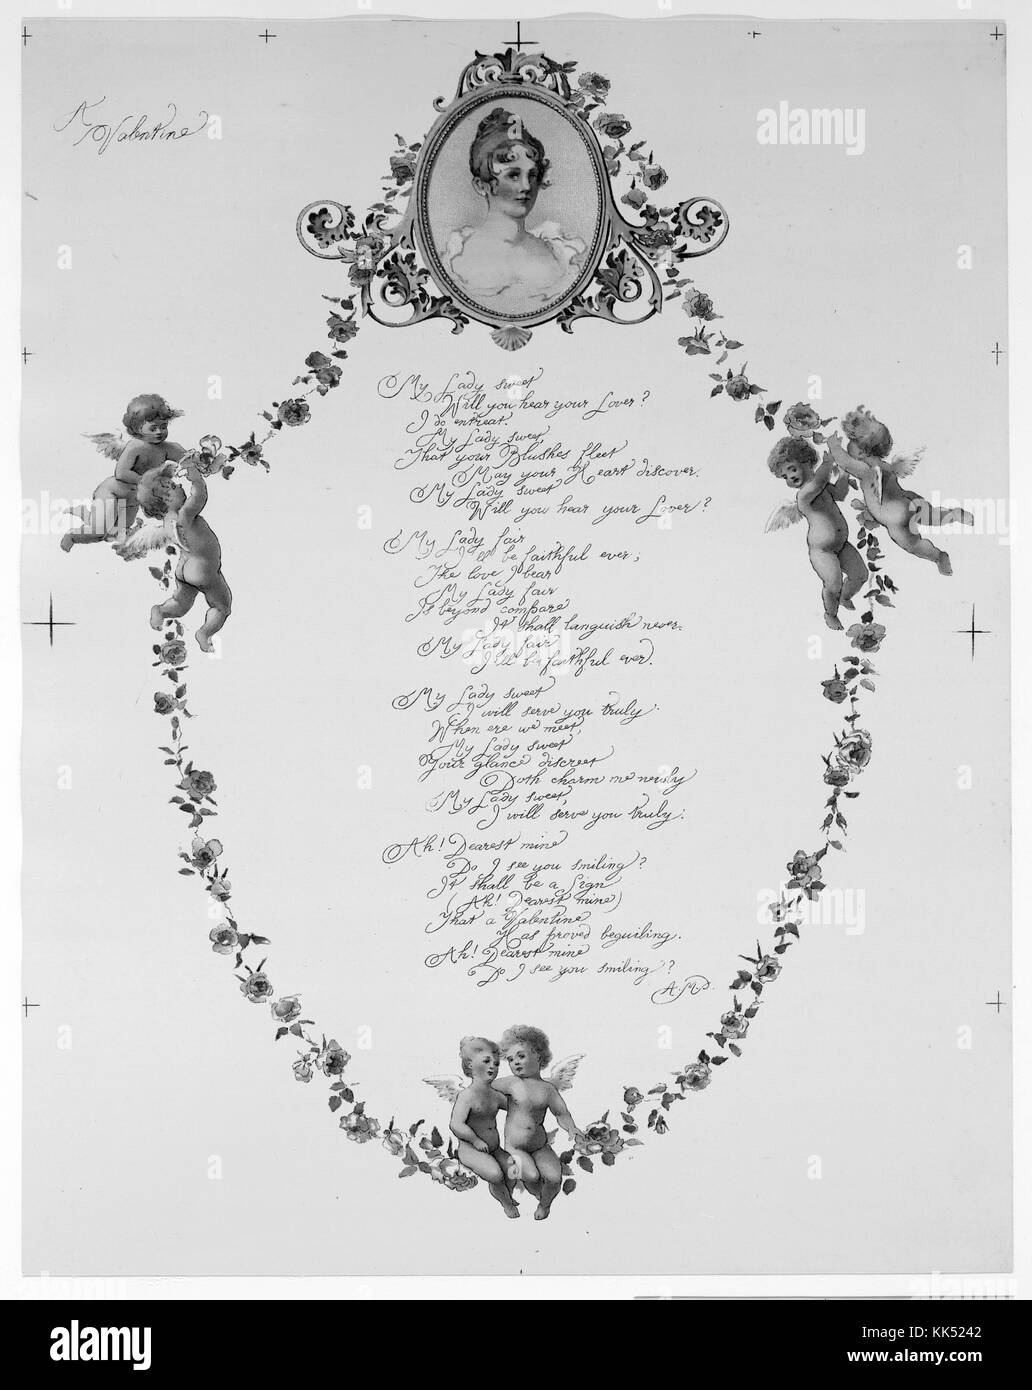 A Valentine, depicting flower garland, angels, portrait of a woman in brass frame, a love poem, seal depicting two birds kissing, published by L Prang and Company, 1900. From the New York Public Library. Stock Photo